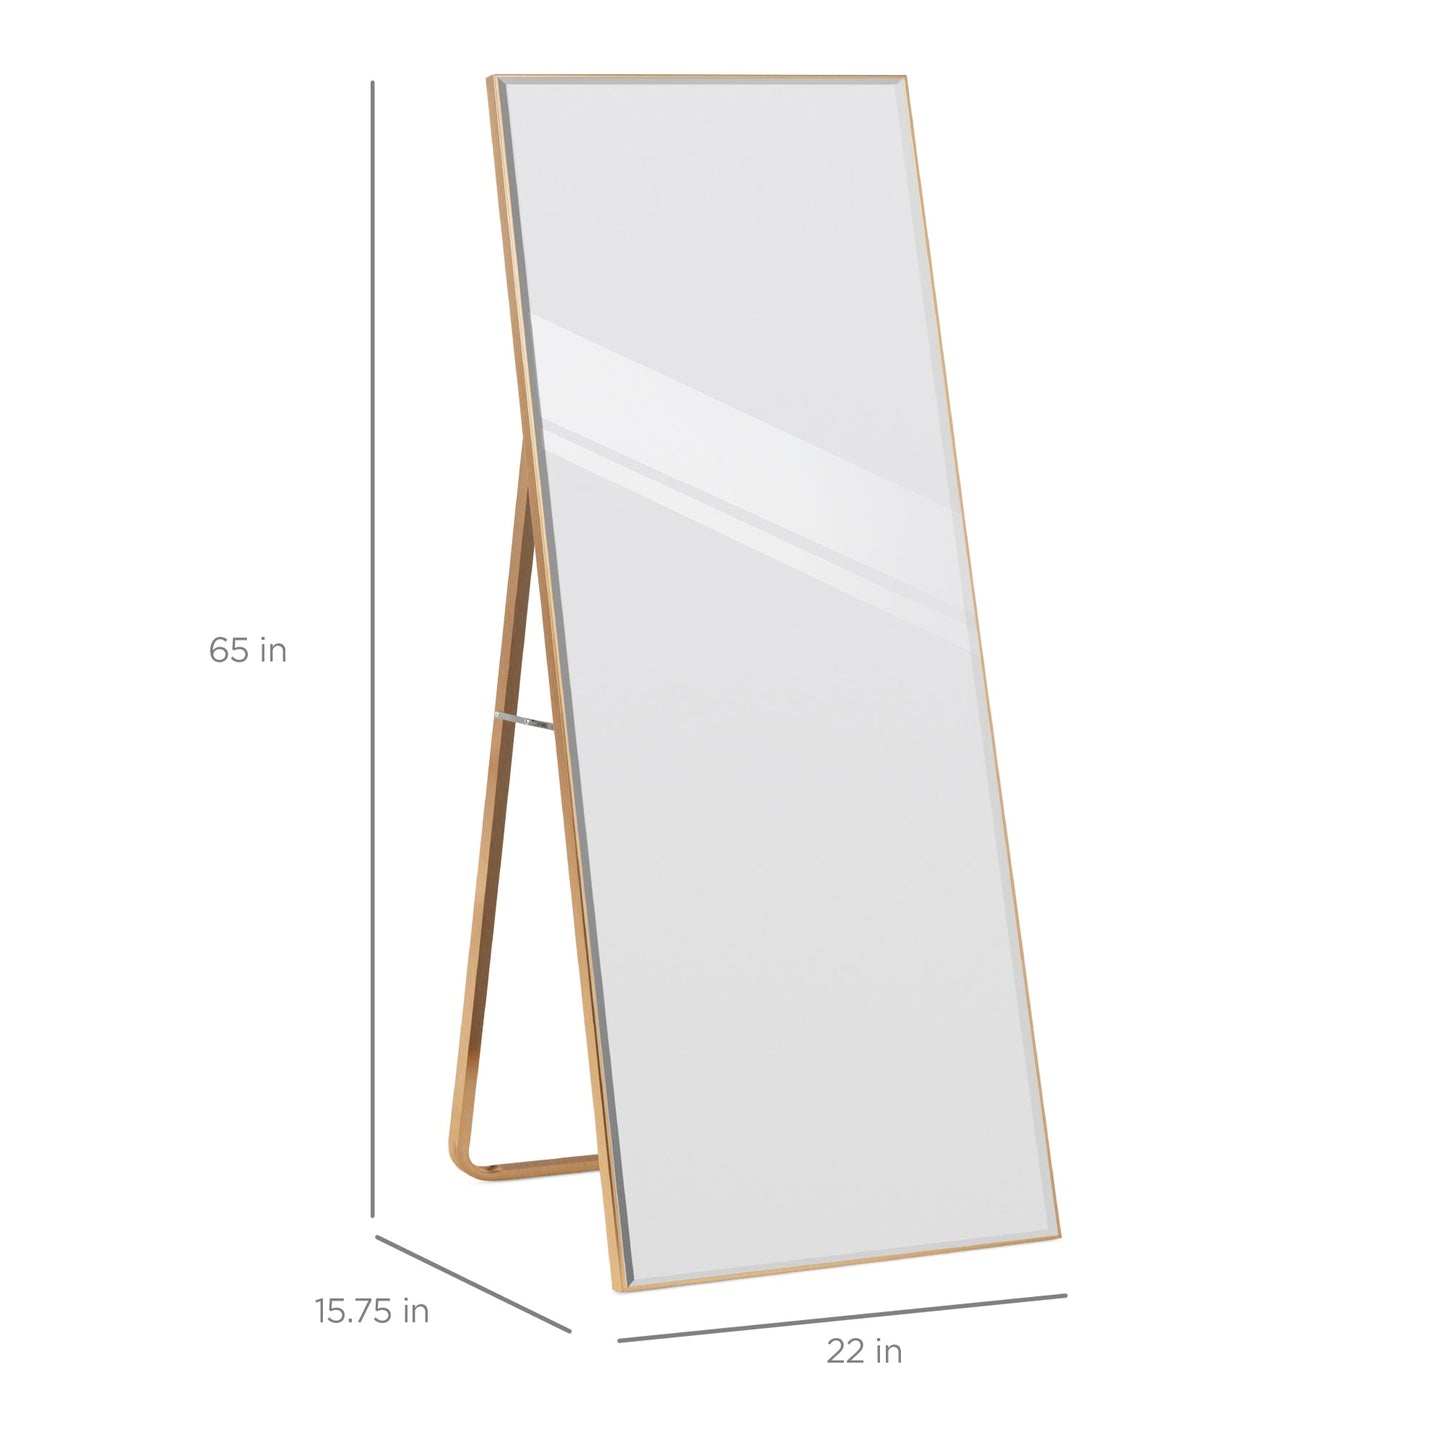 Large Full Length Mirror, Wall Hanging & Leaning Floor Mirror - 65x22in